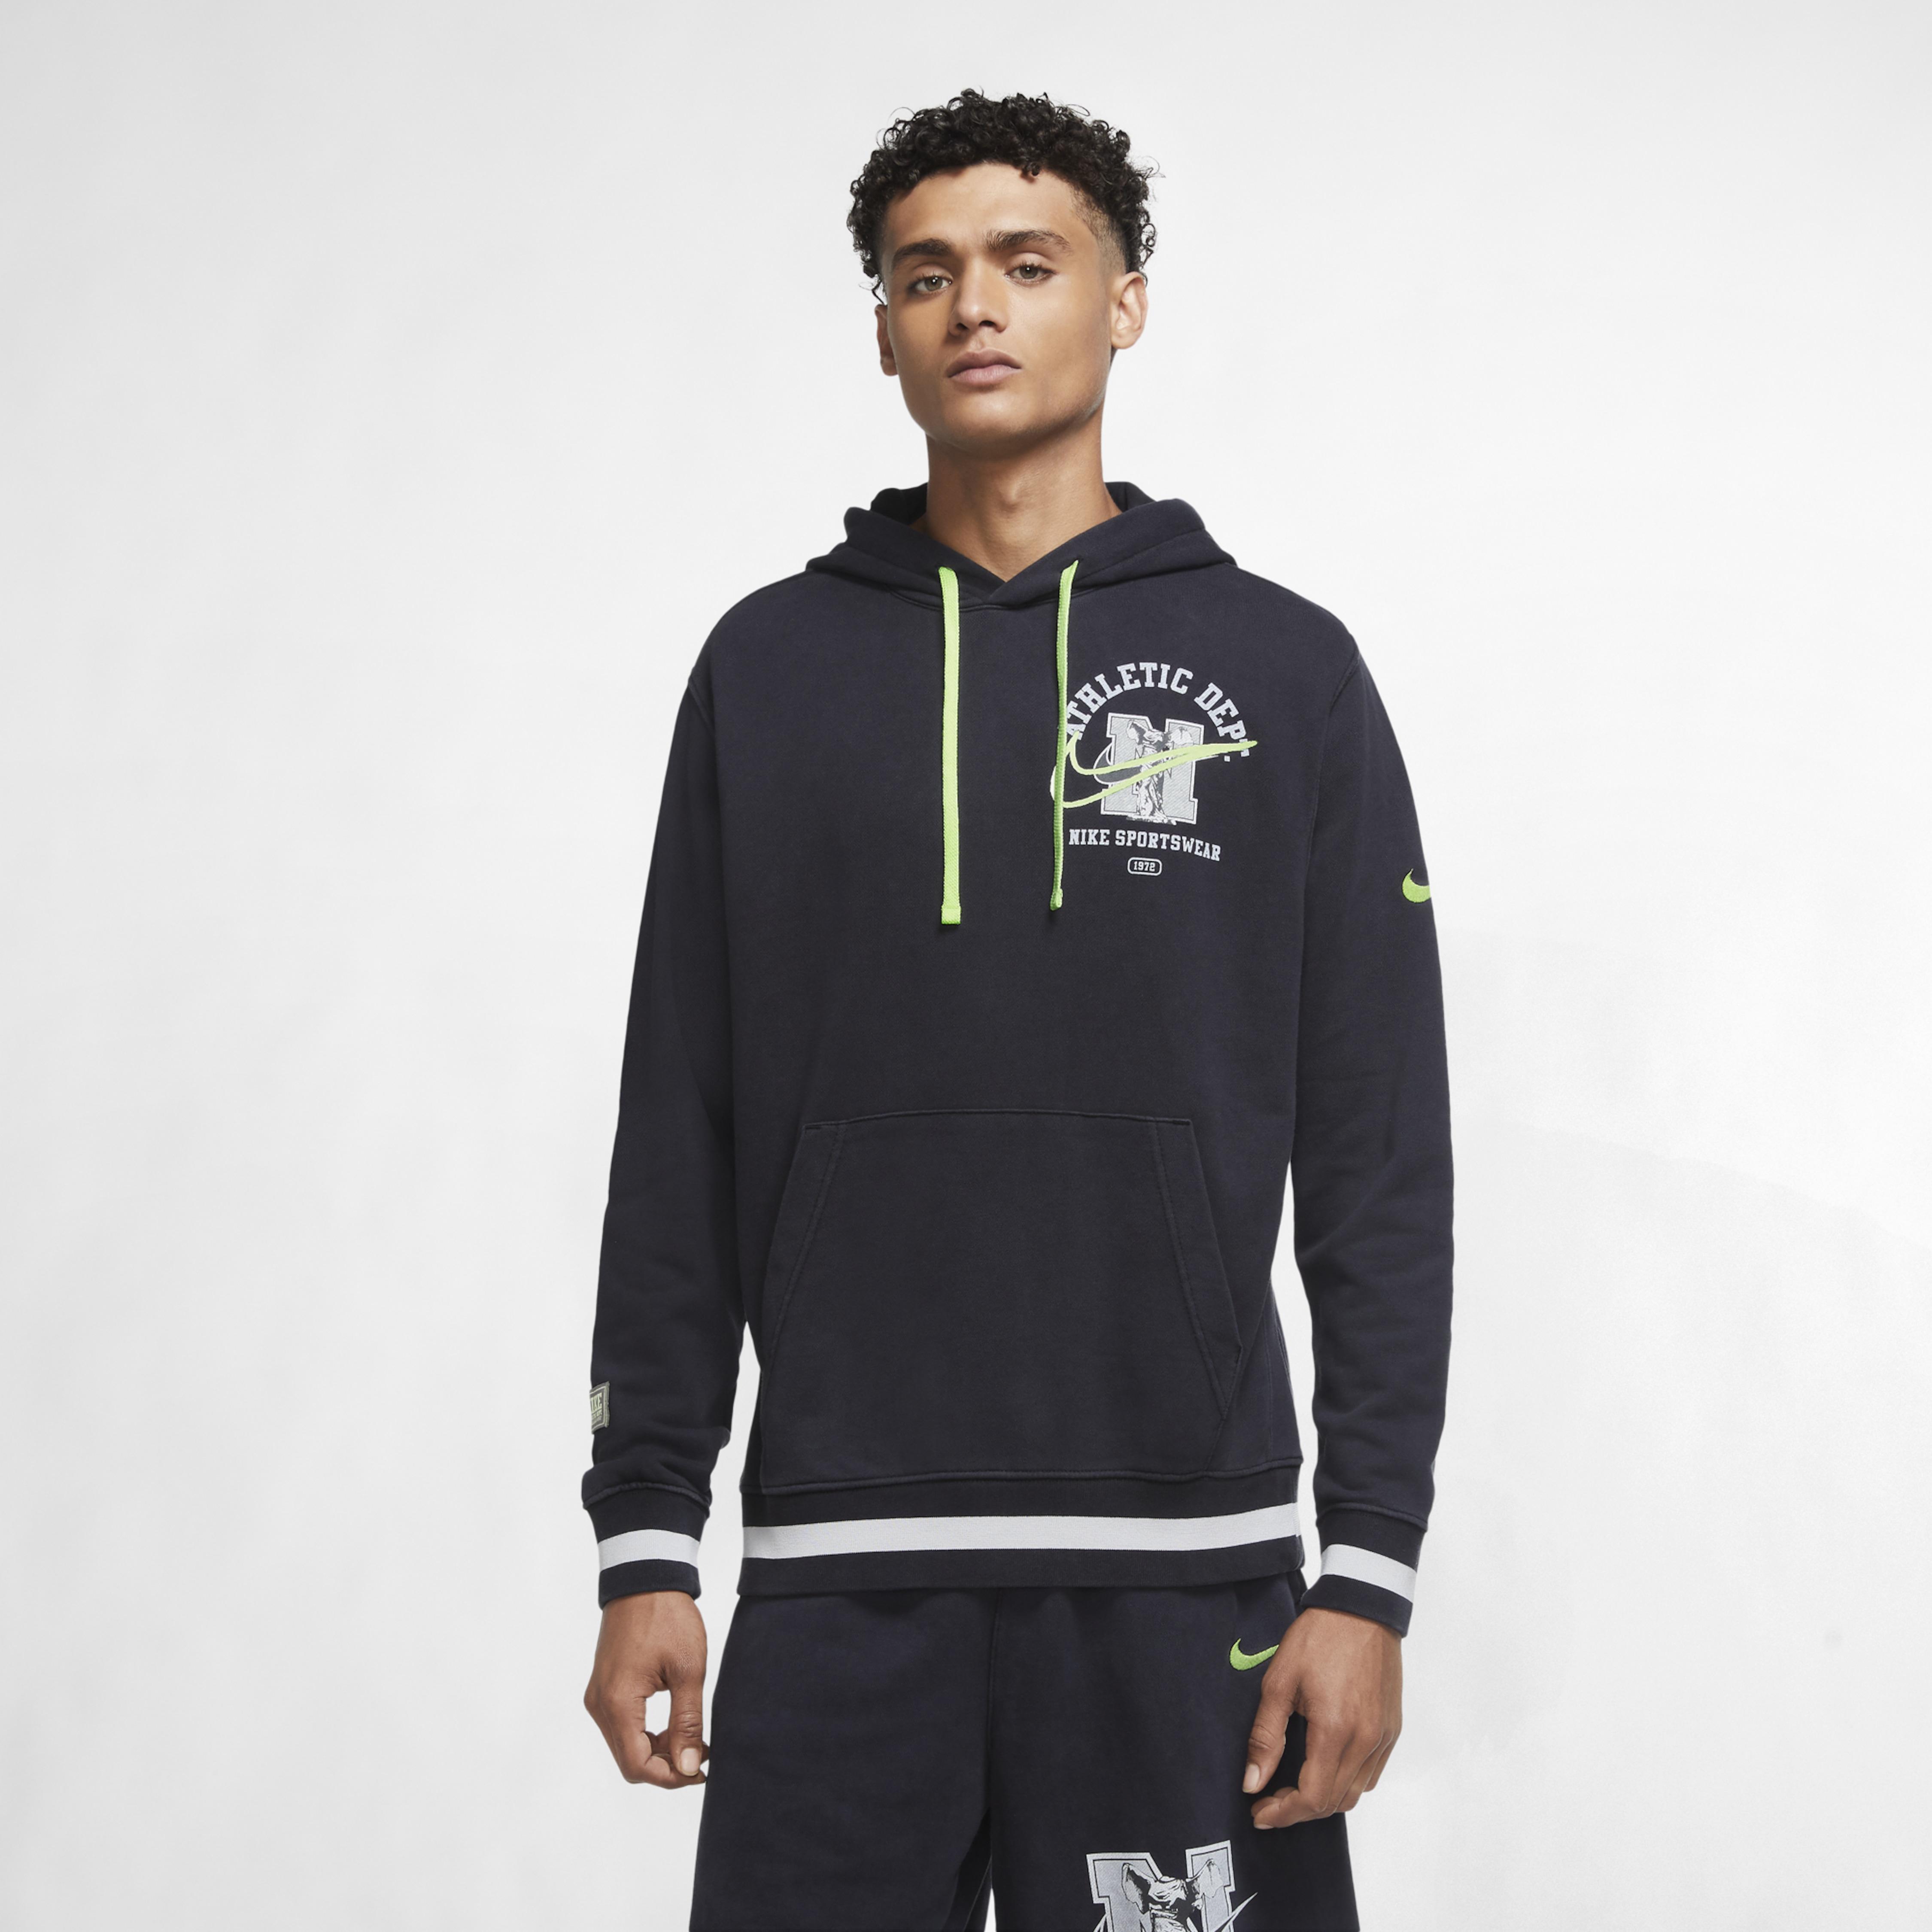 Nike Cotton Class Of 72 Club Hoodie in Black for Men - Lyst